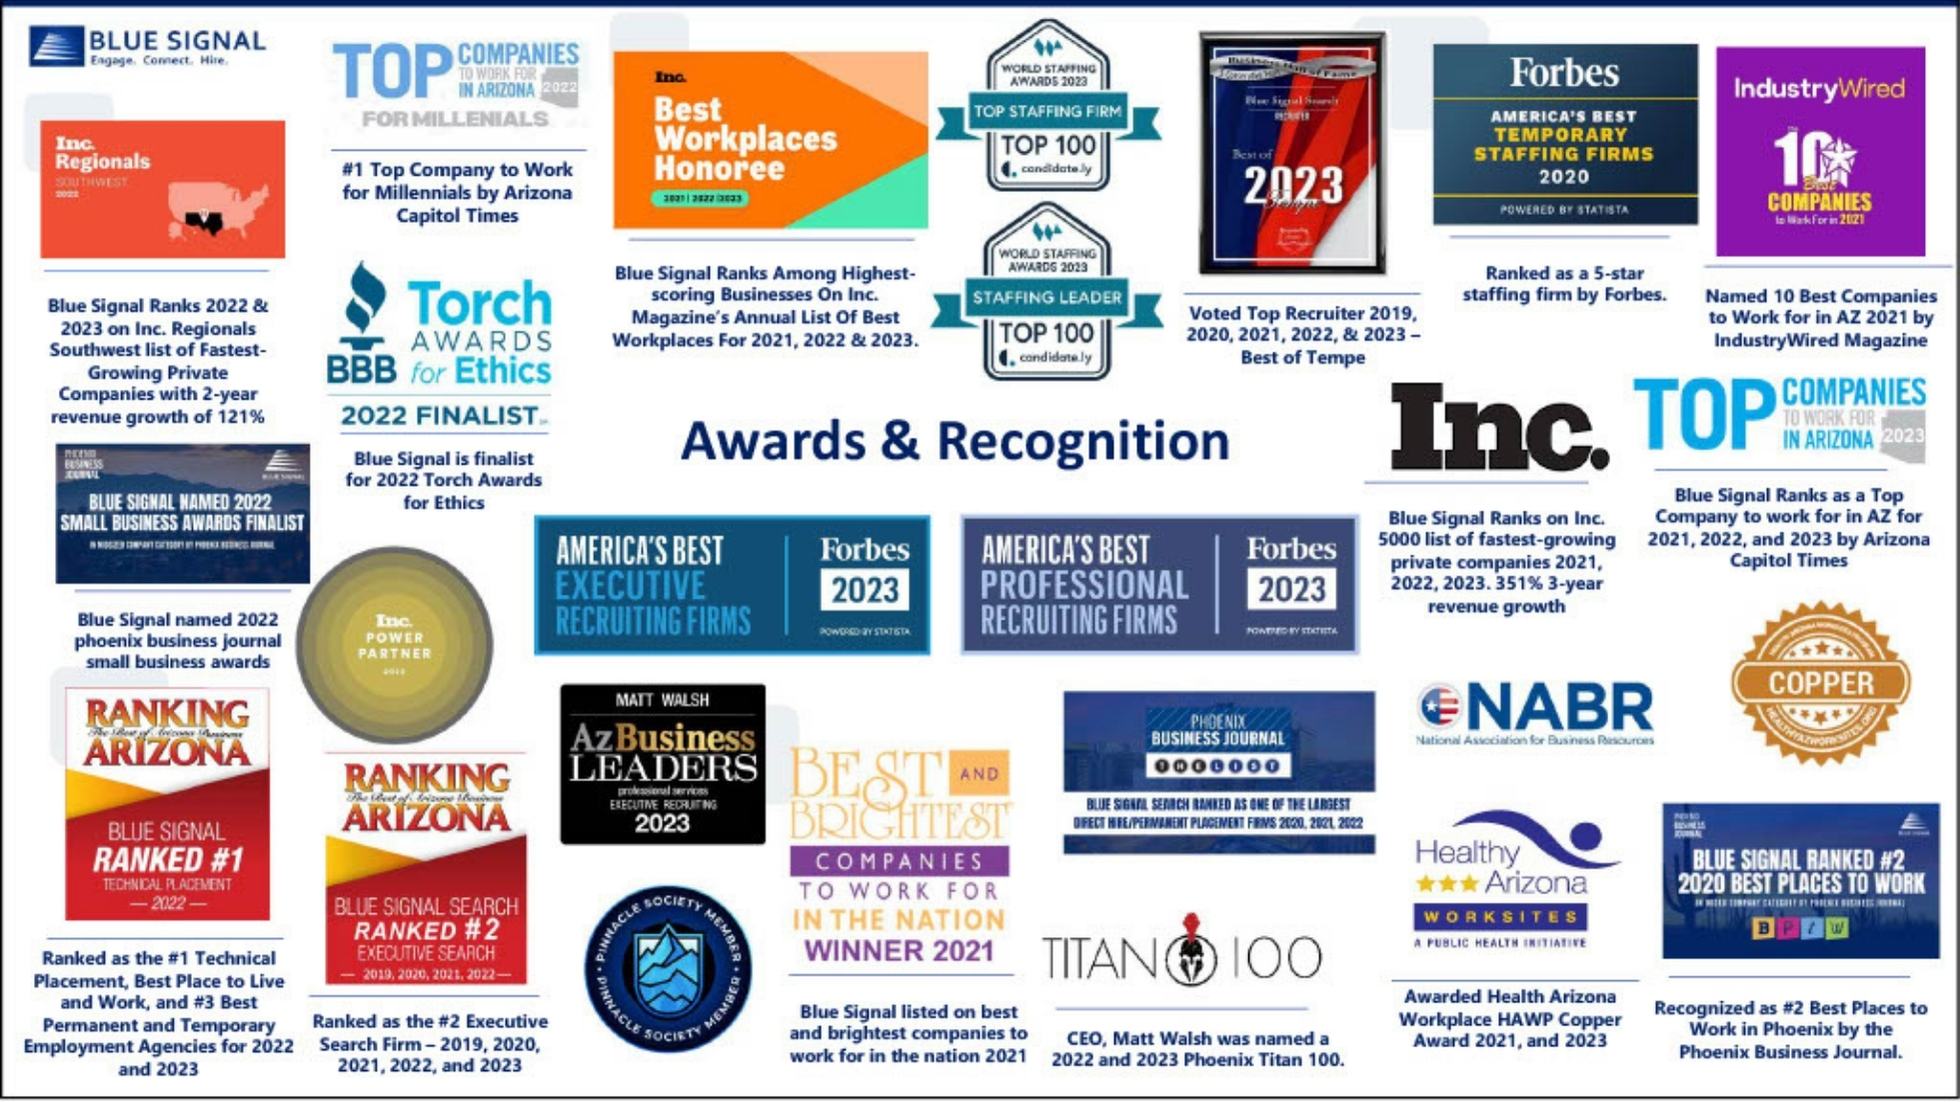 A collage of Blue Signal's awards and recognitions in 2023, affirming their industry excellence and leadership.